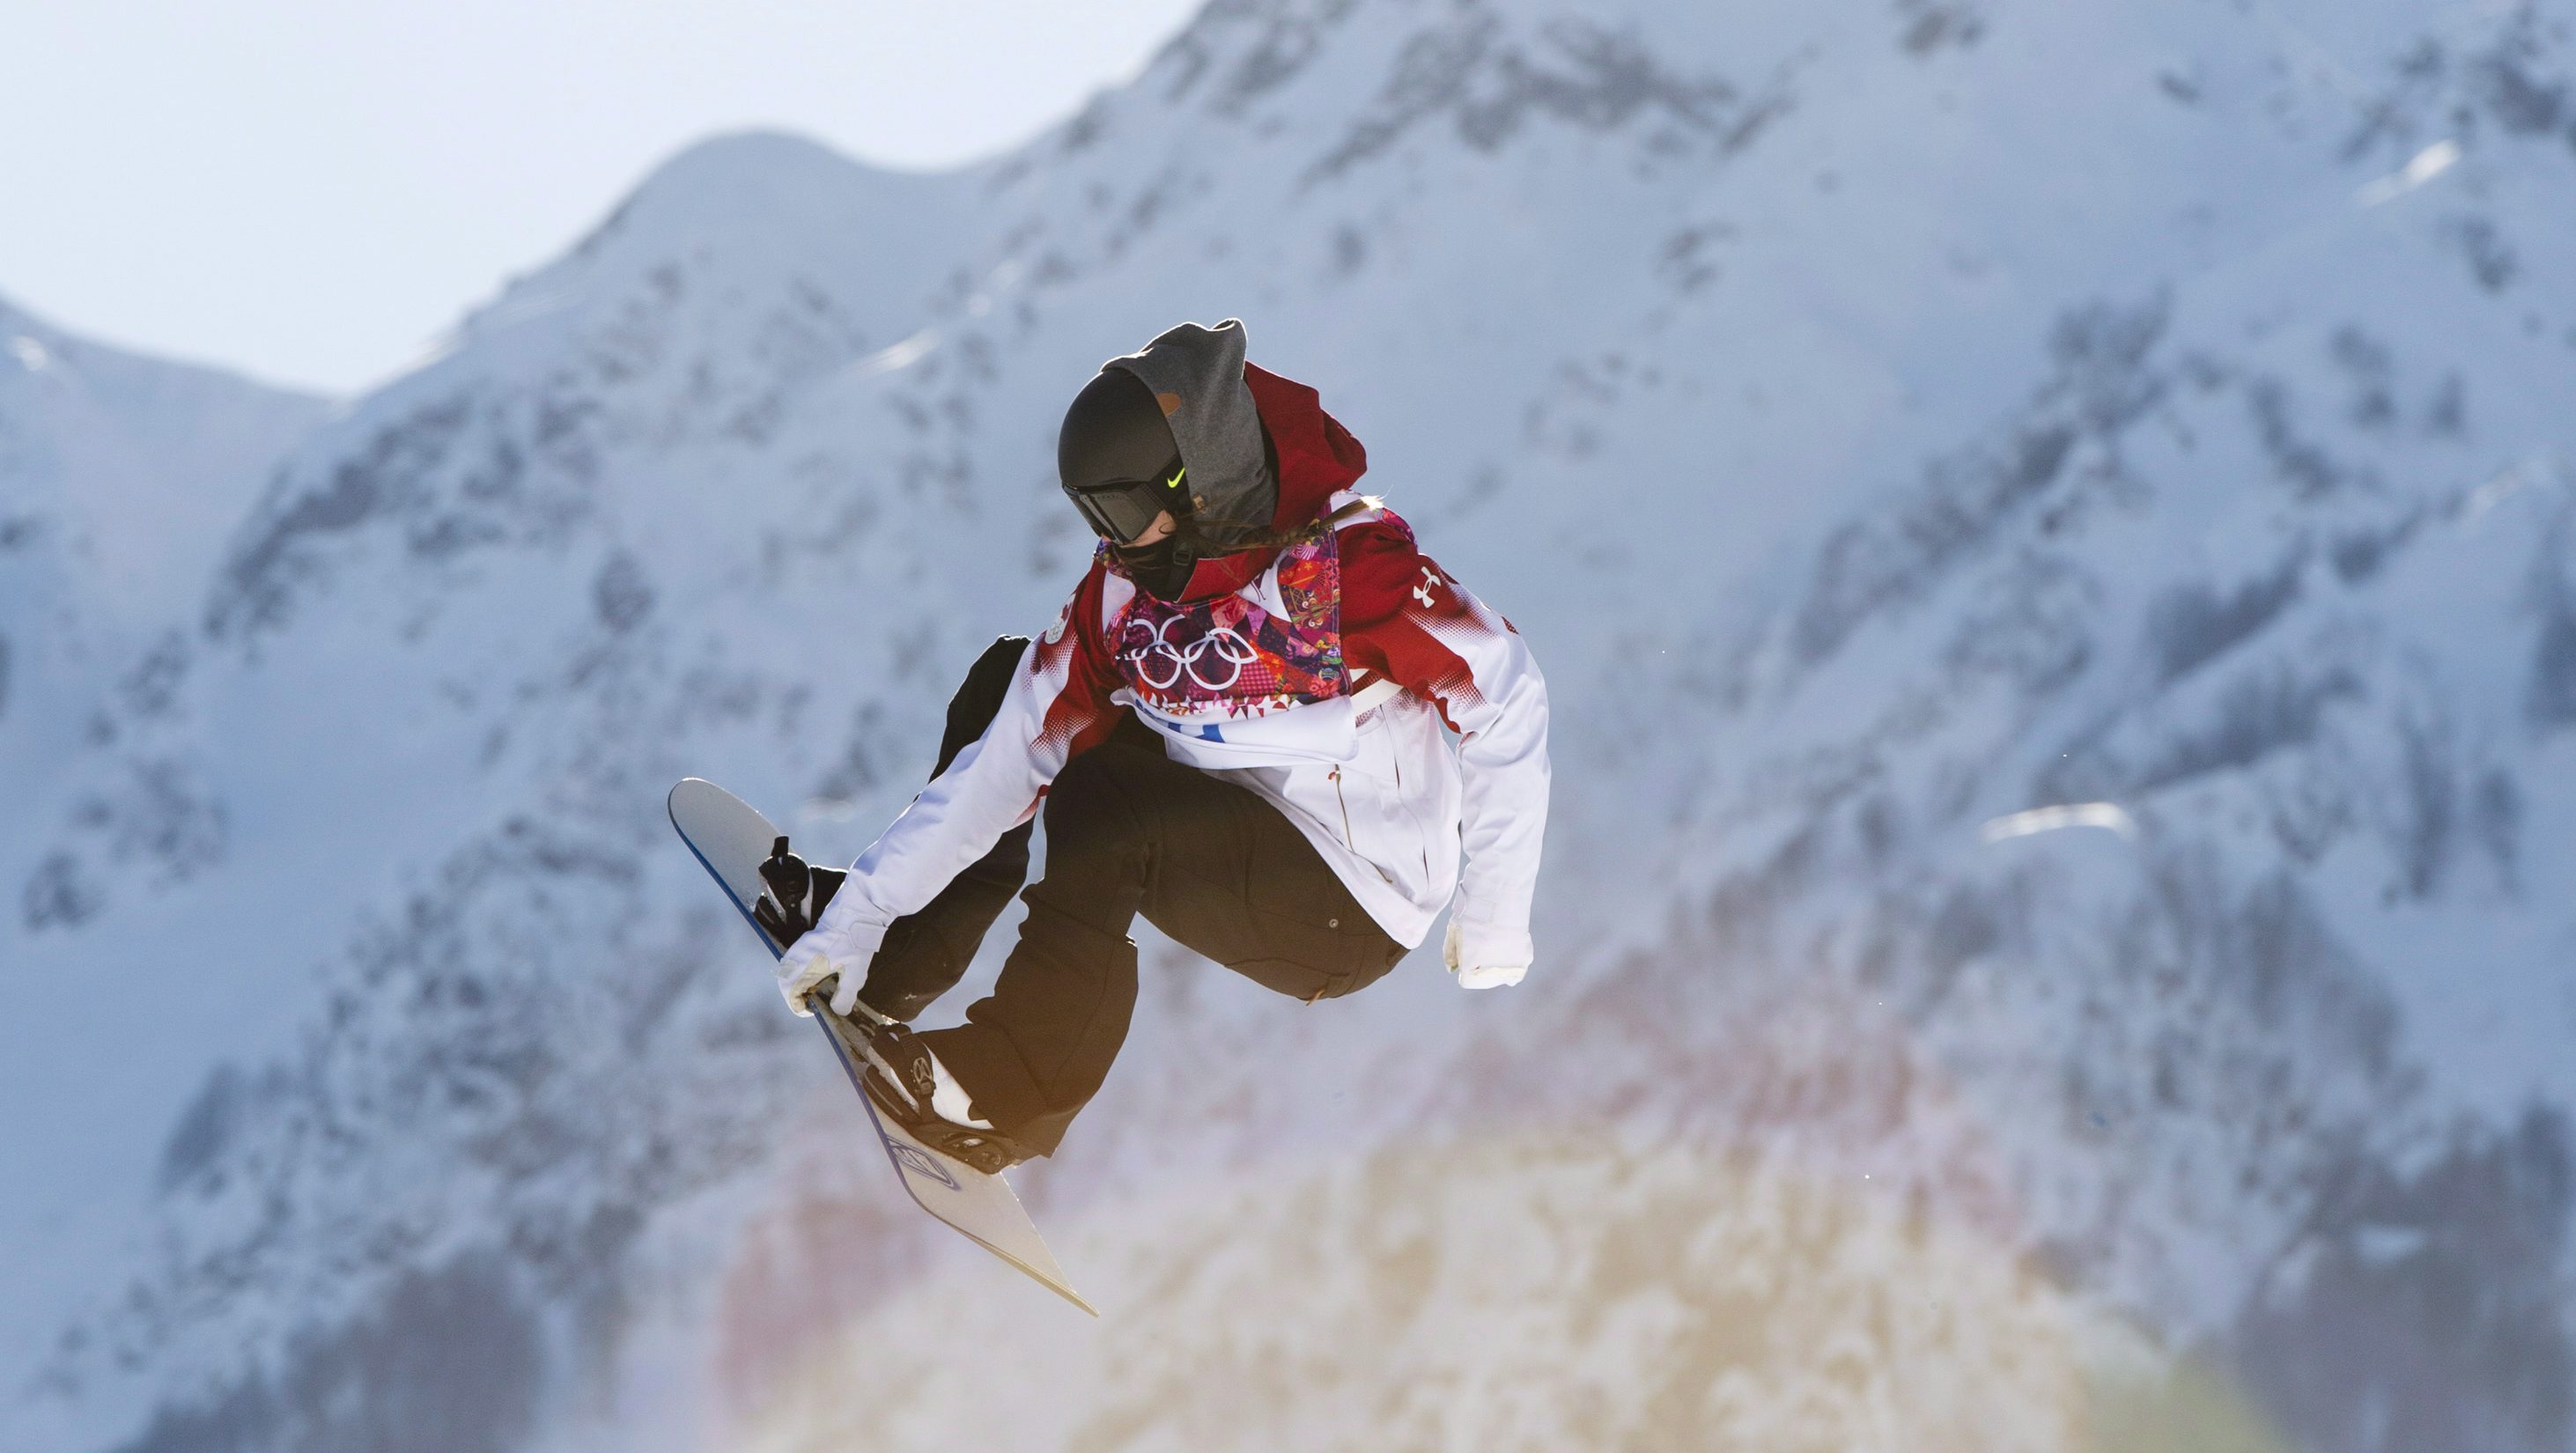 Snowboarder, Spencer O'Brien in the air with mountains in the background.